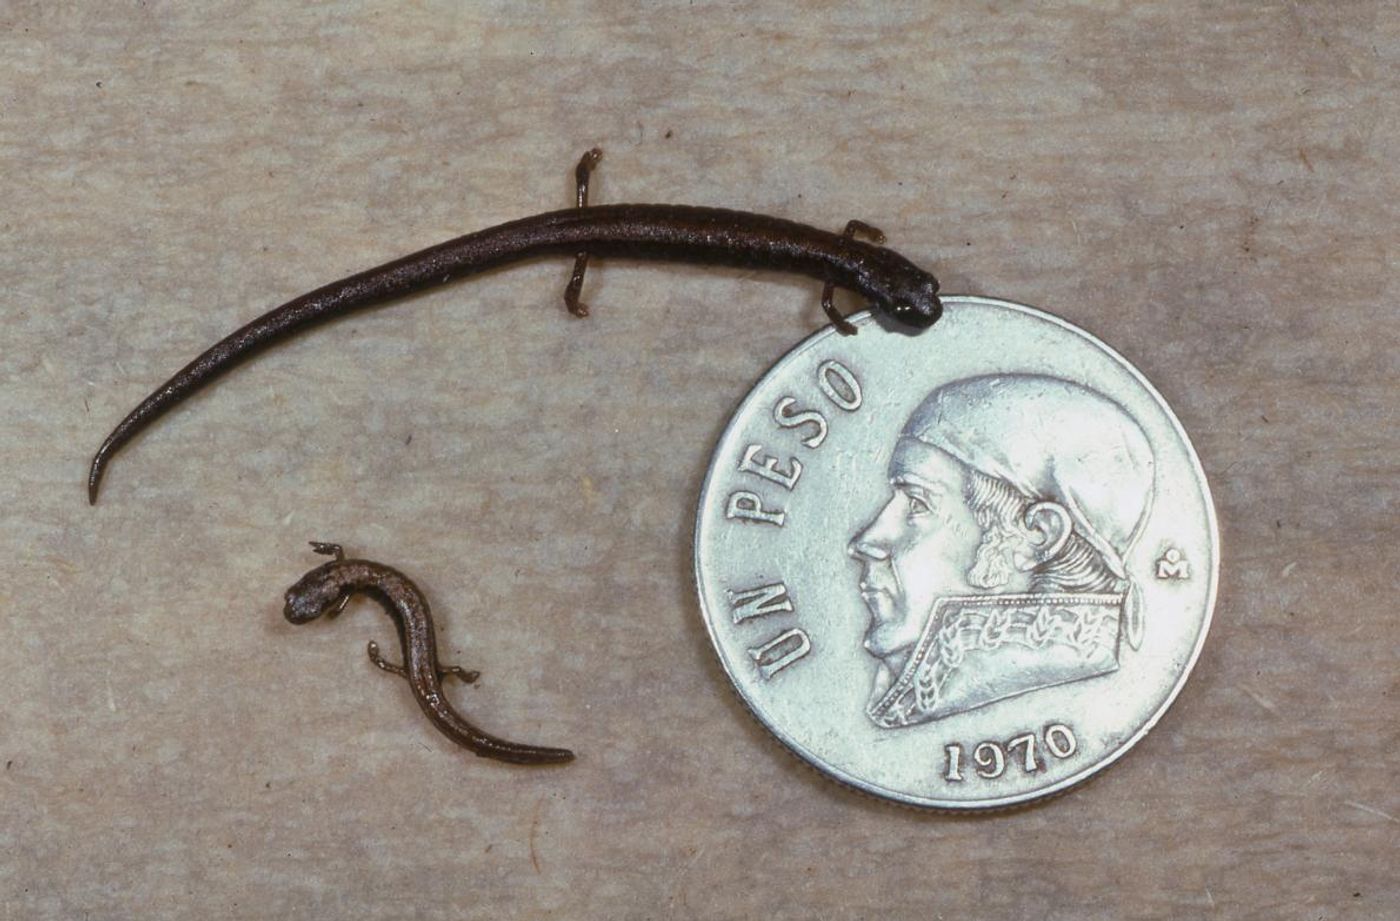 Three miniature salamander species just discovered in Mexico are already enandgered, experts say.